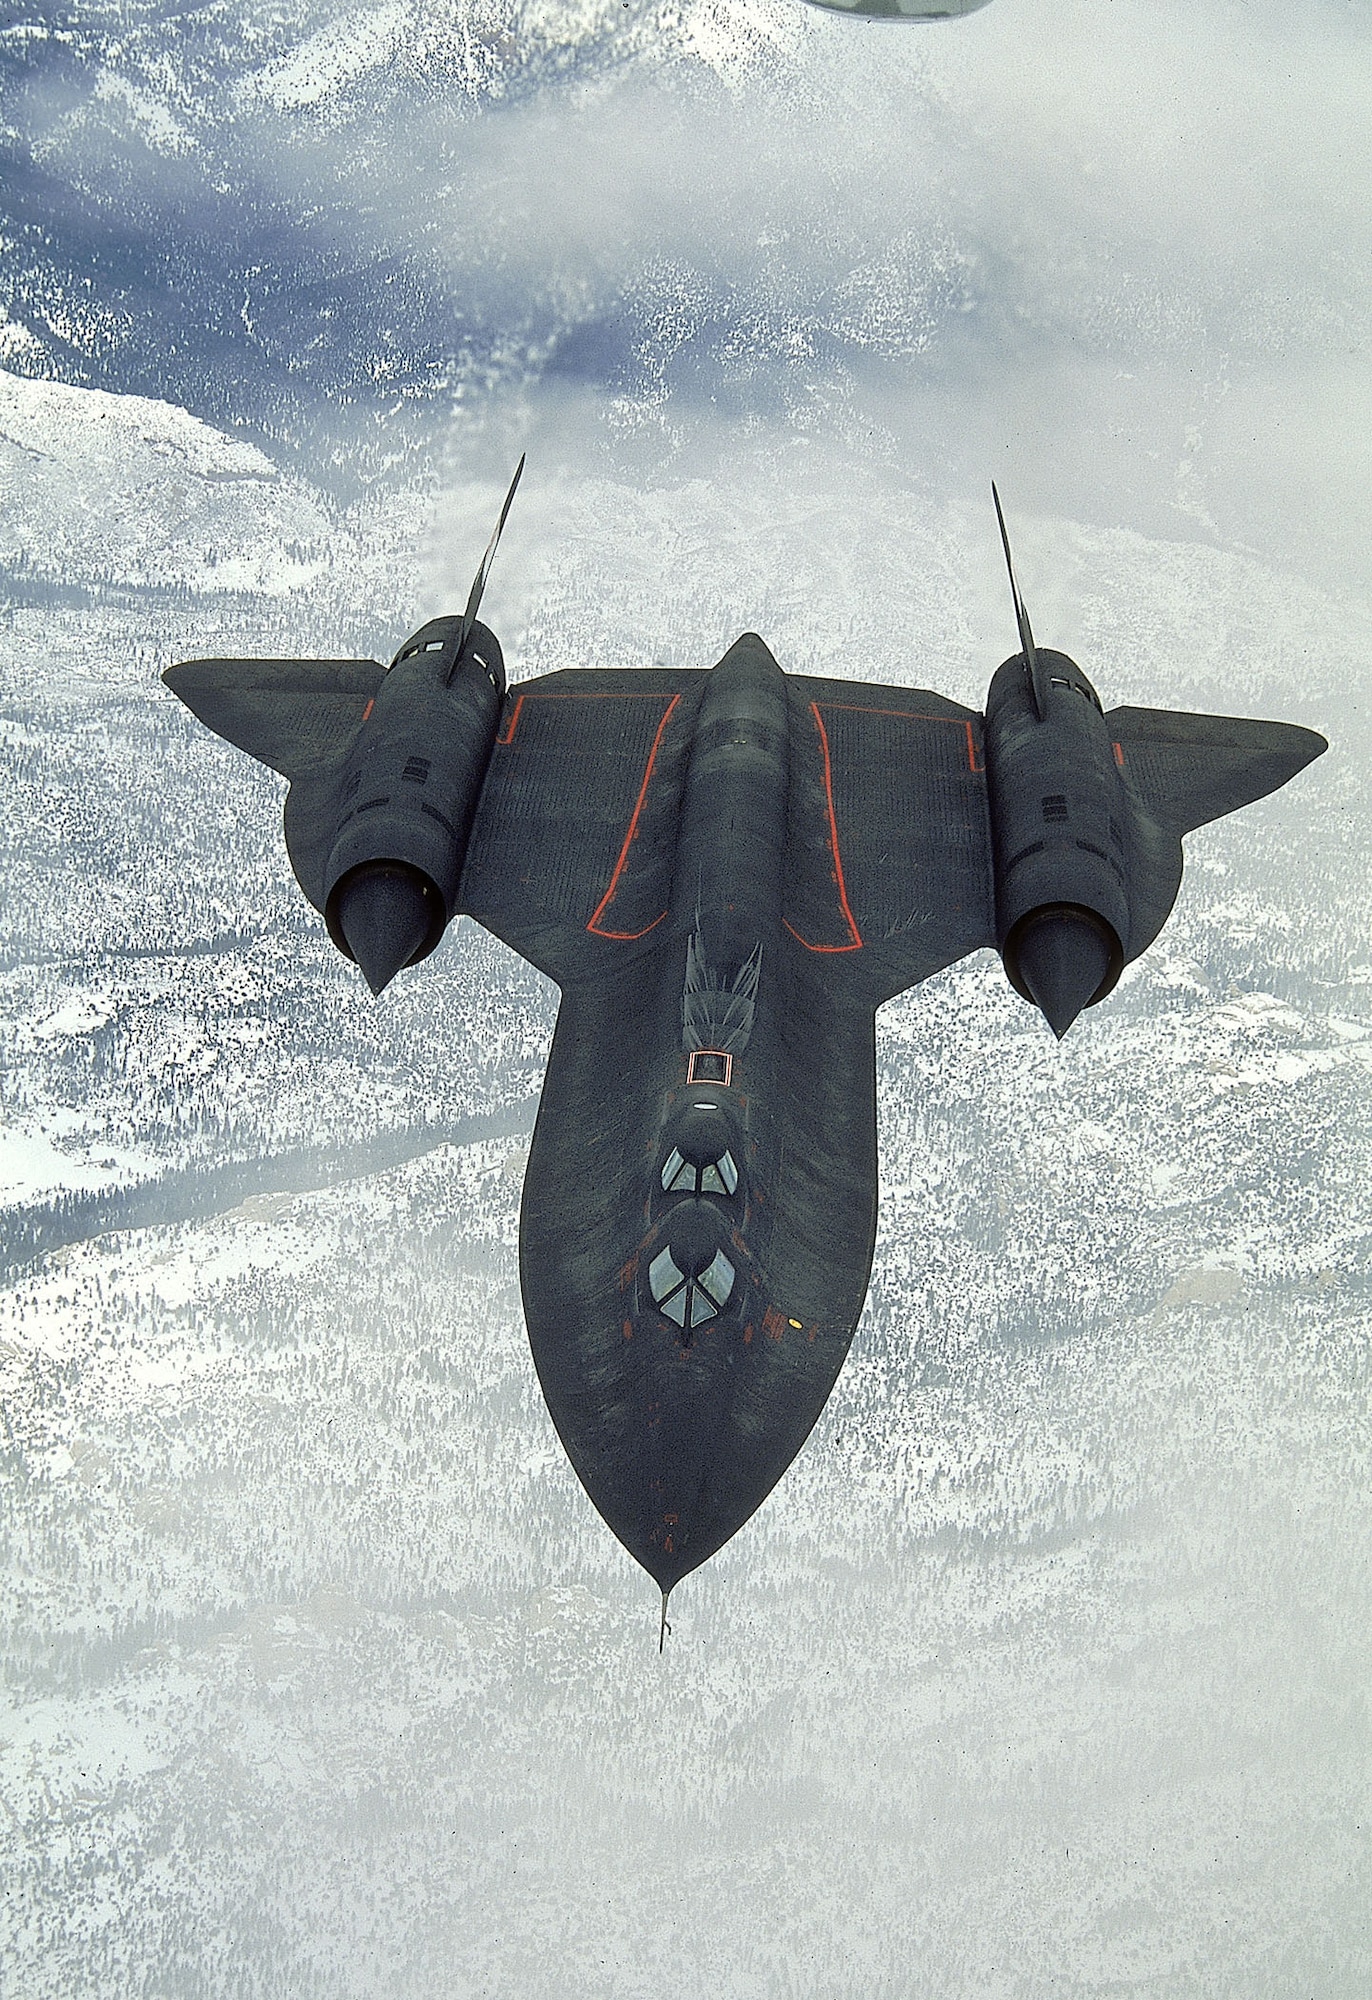 Intelligence gathered during SR-71 reconnaissance missions throughout the Cold War provided the U.S. government with key information at critical moments. An SR-71, such as this one, will be on display with April 21 between 11 a.m. and 4 p.m. at Blackbird Airpark in Palmdale, Calif. during an event commemorating the 50th Anniversary of the Cuban Missile Crisis and the first flight of the Lockheed A-12 Interceptor. (Air Force Photo)